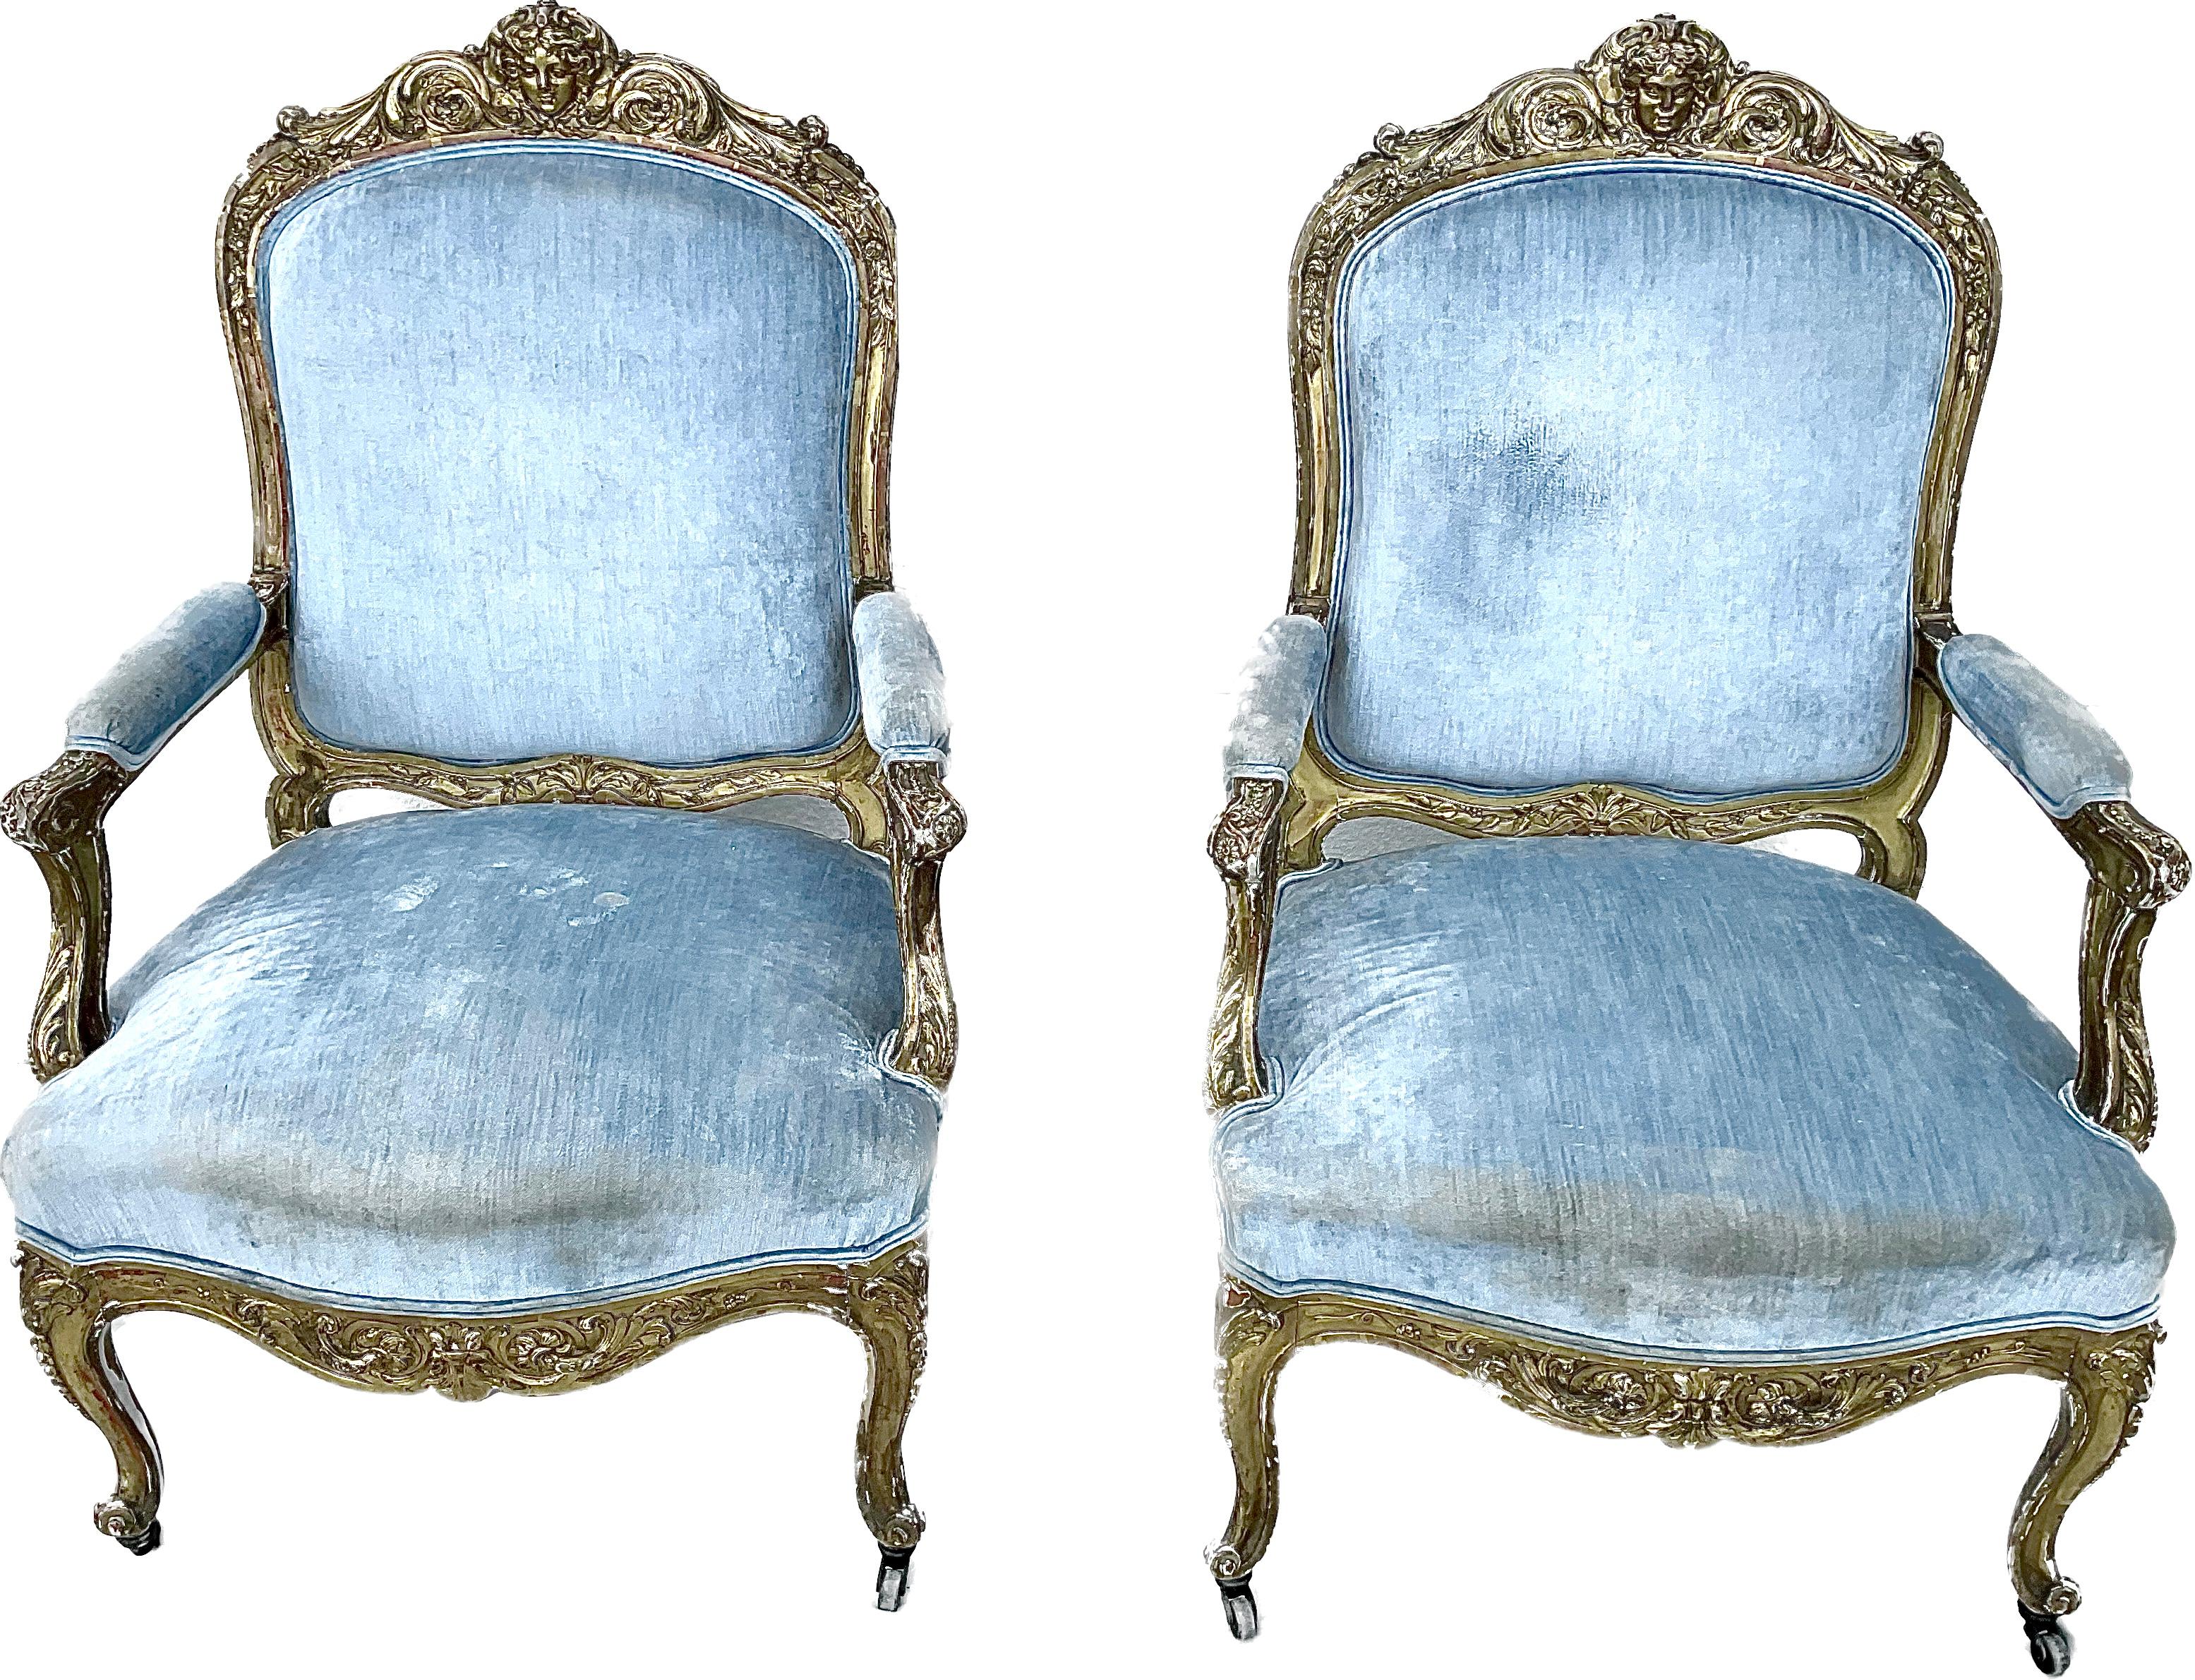 Pair of 19th Century Carved Giltwood Italian Armchairs of generous proportions. Each armchair is raised by cabriole legs, the front legs having rollers. Each chair features beautiful hand carved scrolling accented with acanthus leaves, the back rest